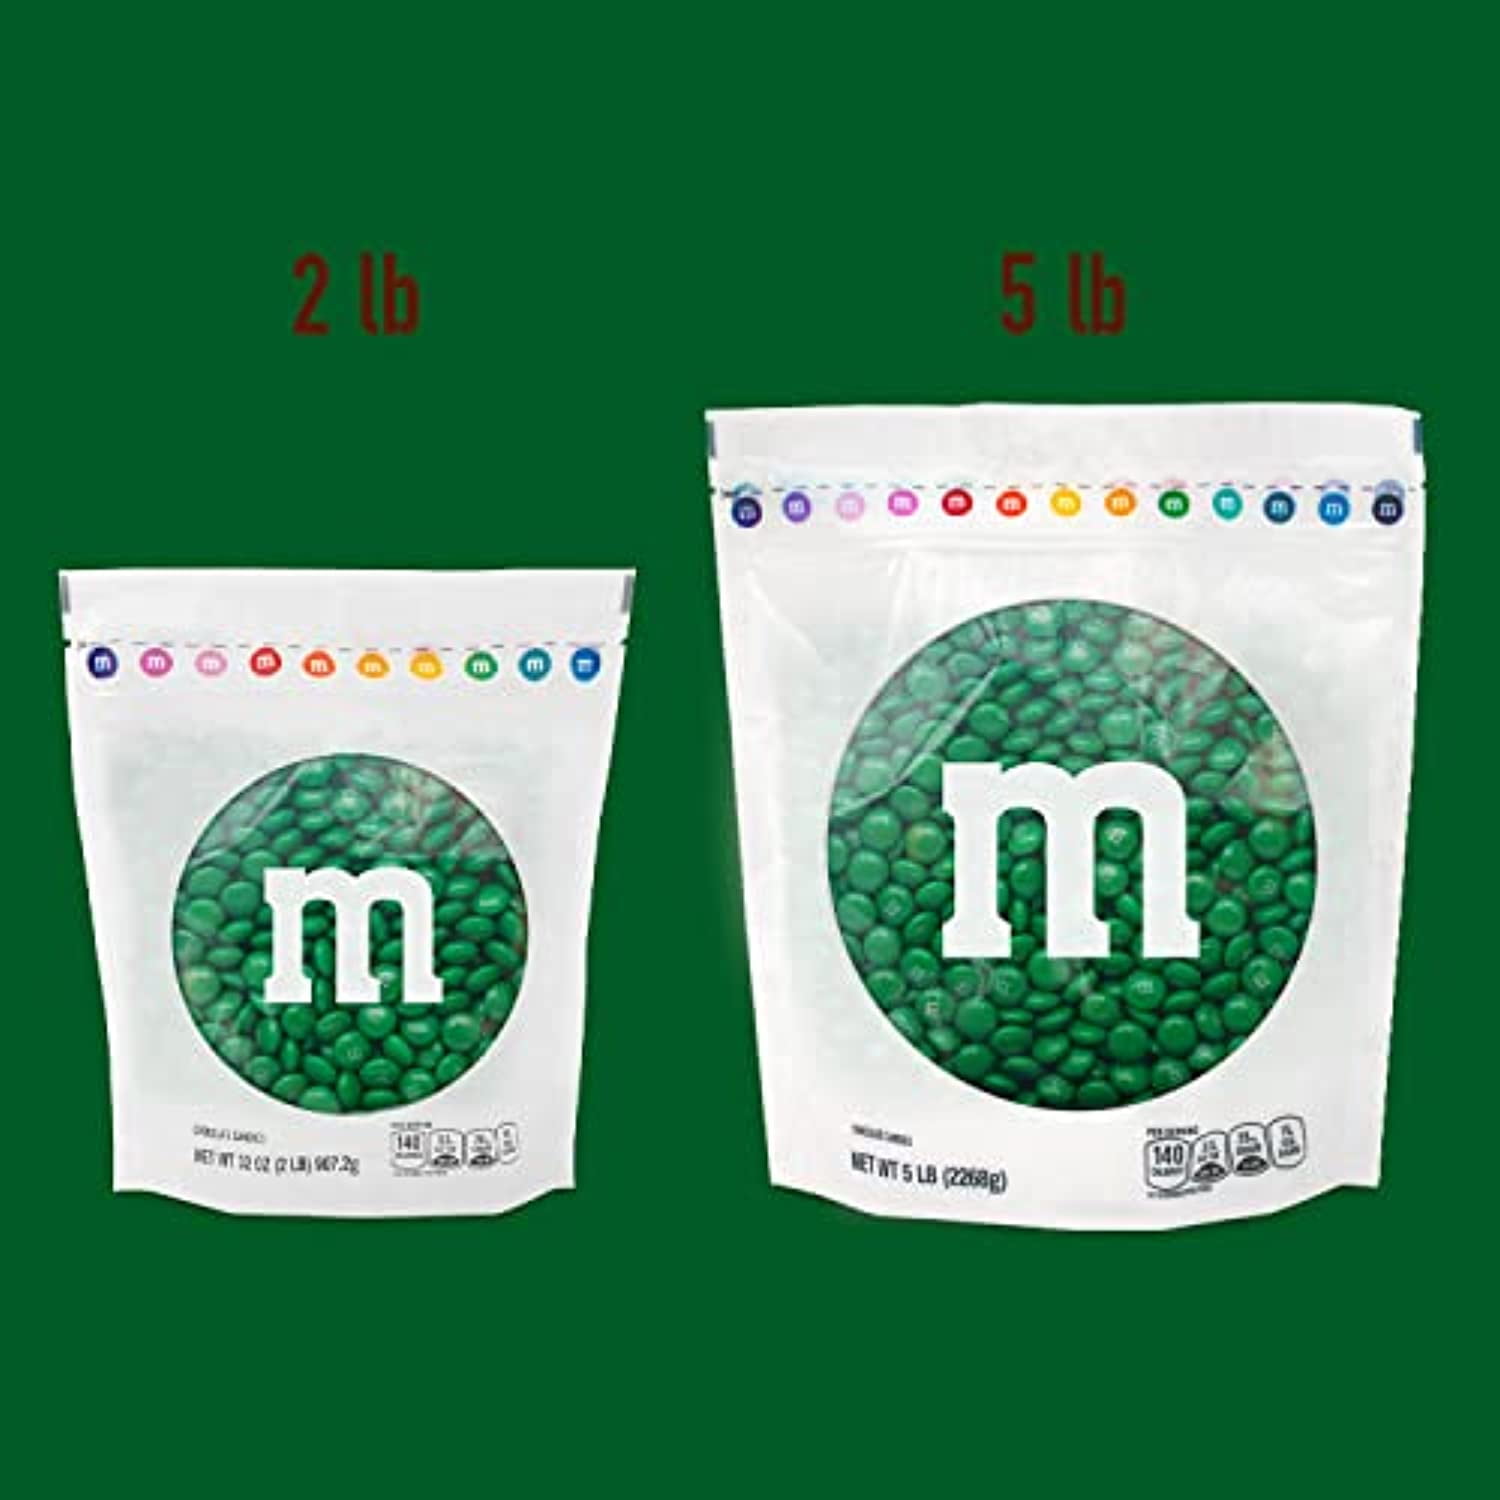 M&M'S Milk Chocolate White Candy - 5Lbs Of Bulk Candy In Resealable Pack  For St Patricks Day, Easter, Candy Buffet, Wedding, Graduation, Birthday  Parties, Candy Bar,Or Sweet Stuff For Diy Party F 